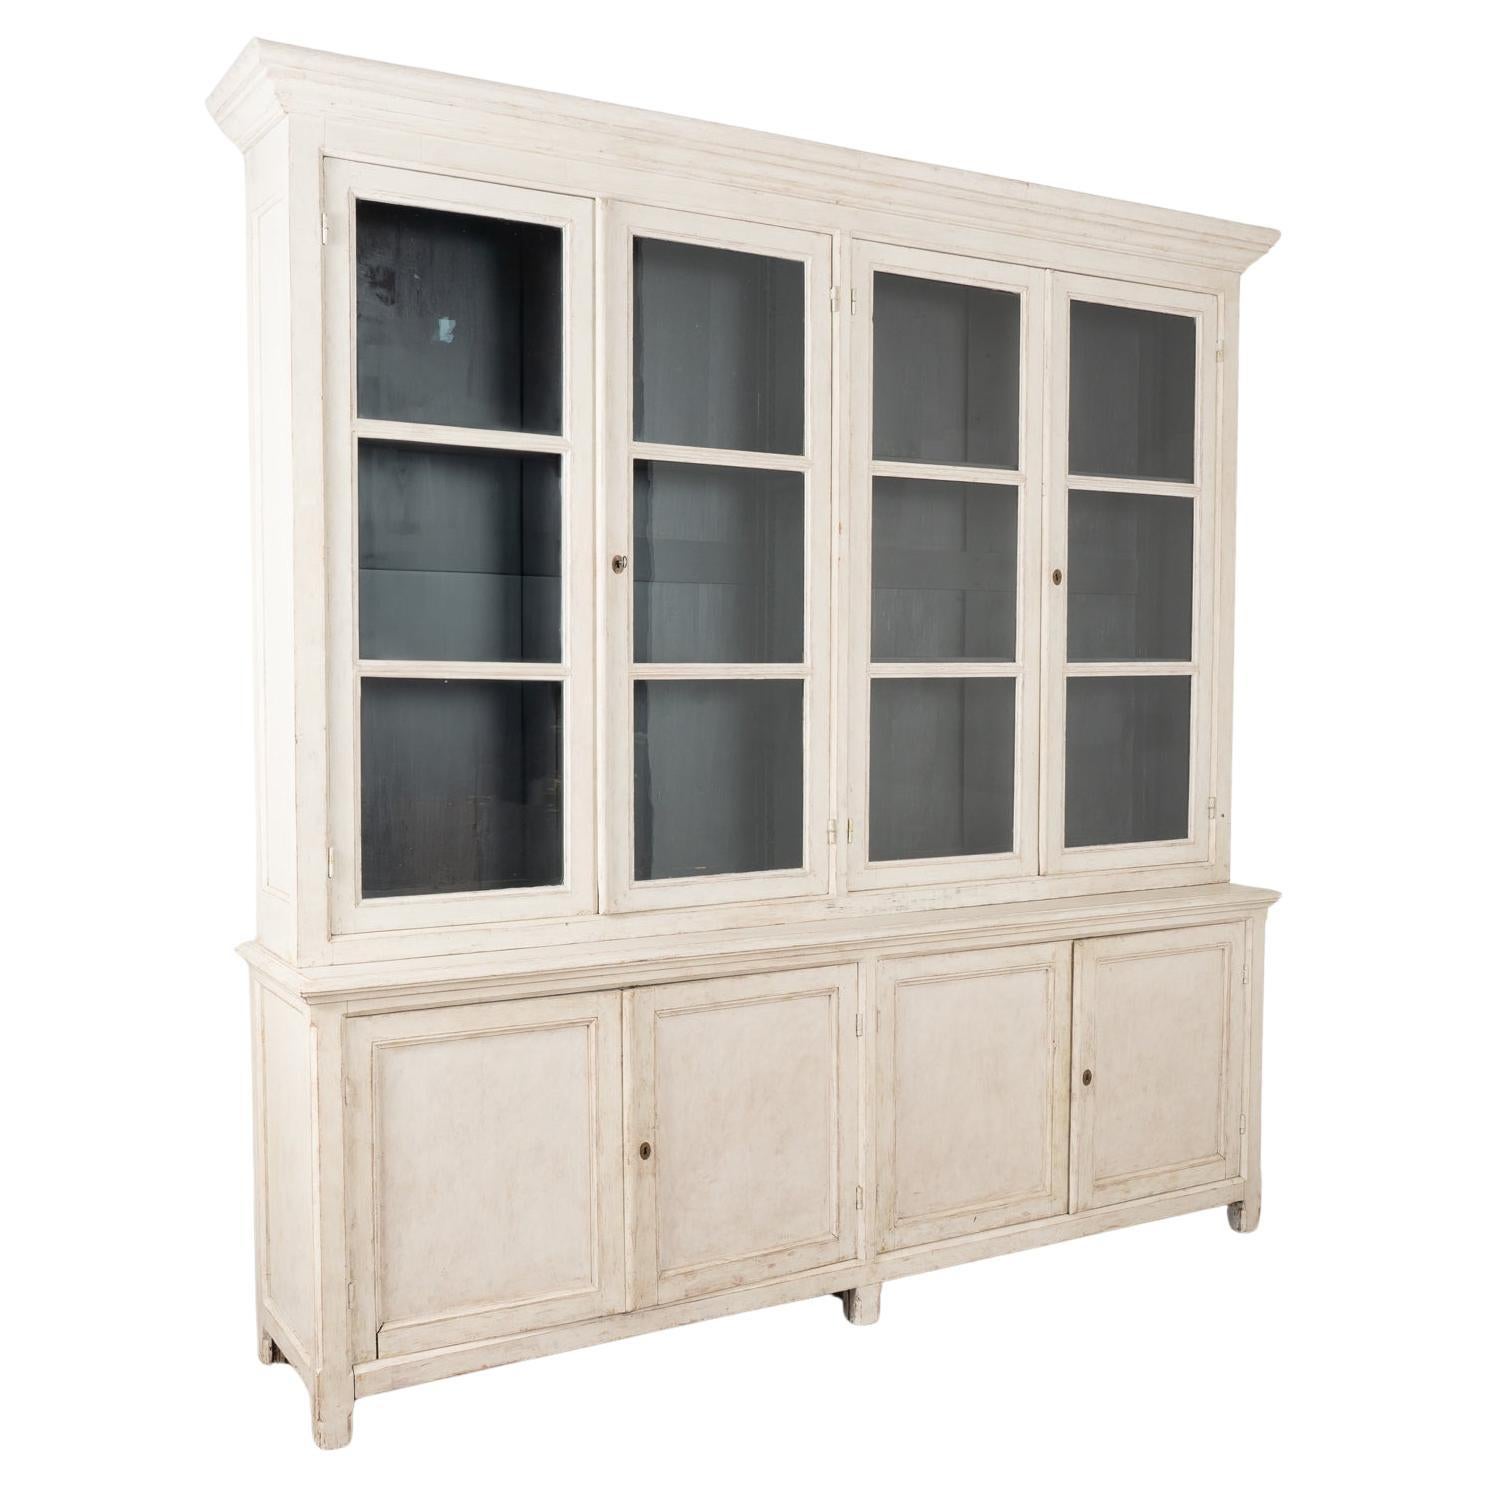 Large White Painted Bookcase Display Cabinet, Sweden circa 1880